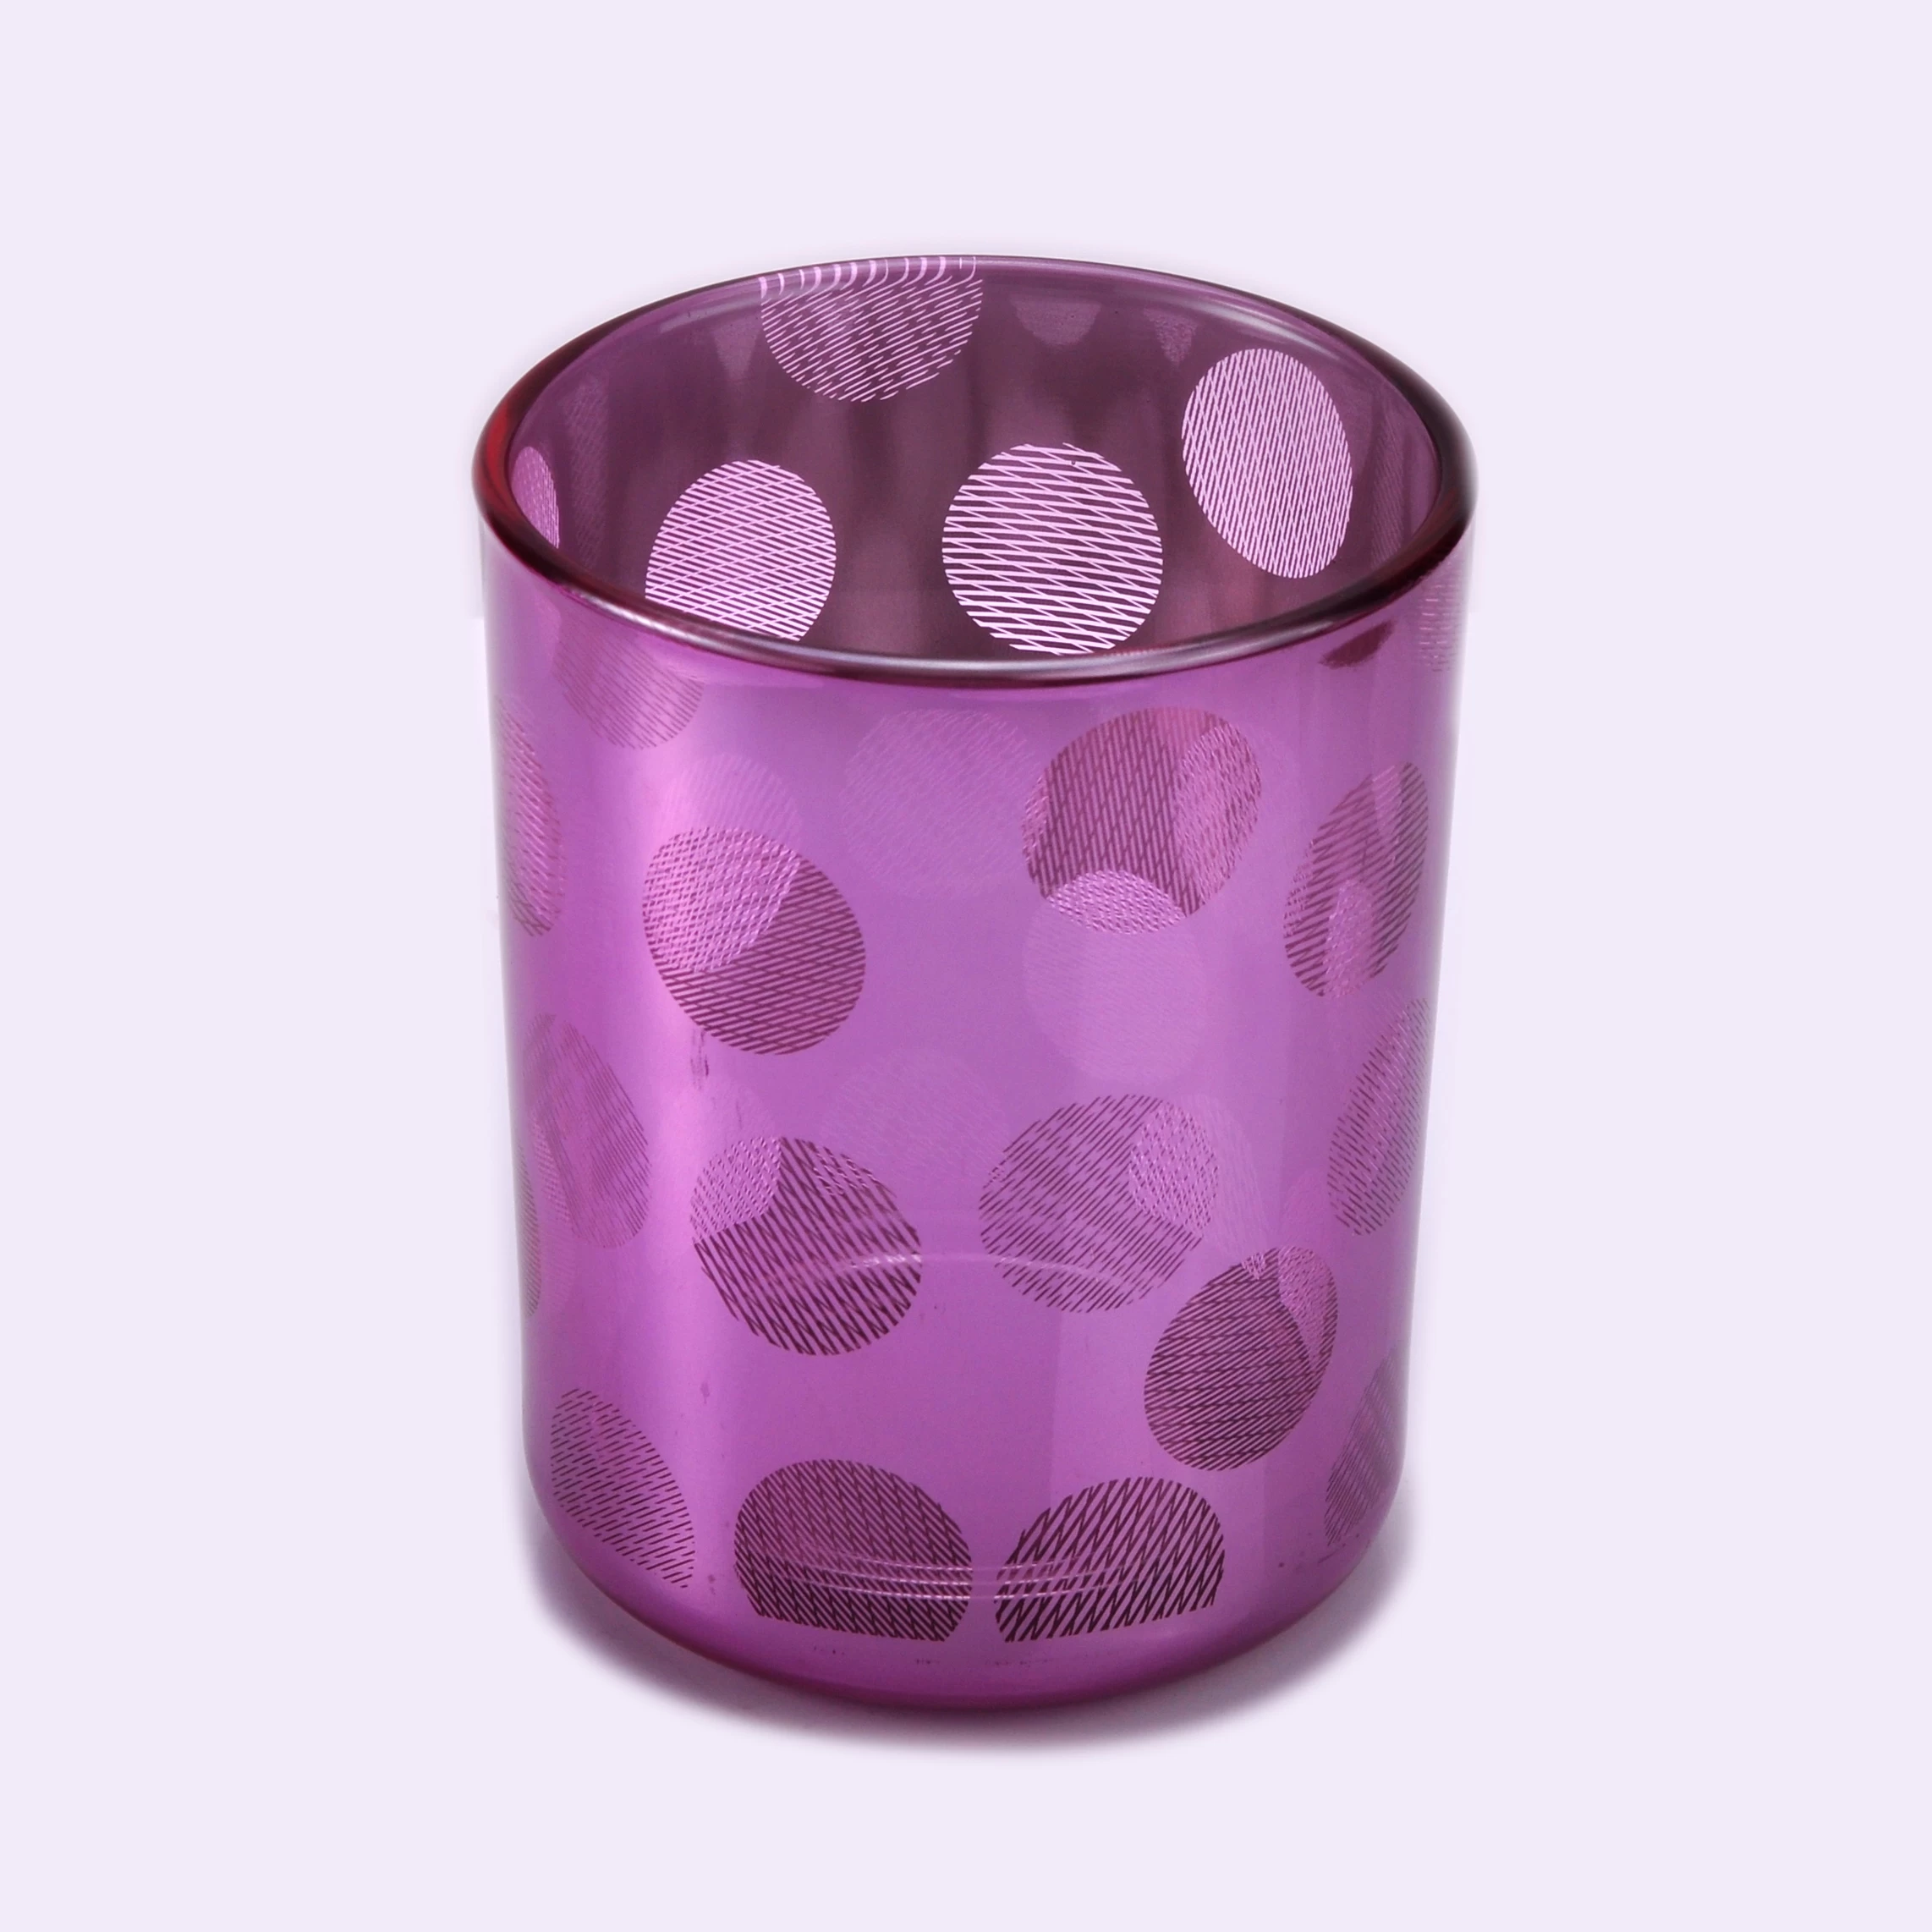 Luxury empty glass candle jar with laser engraved pattern for candle making